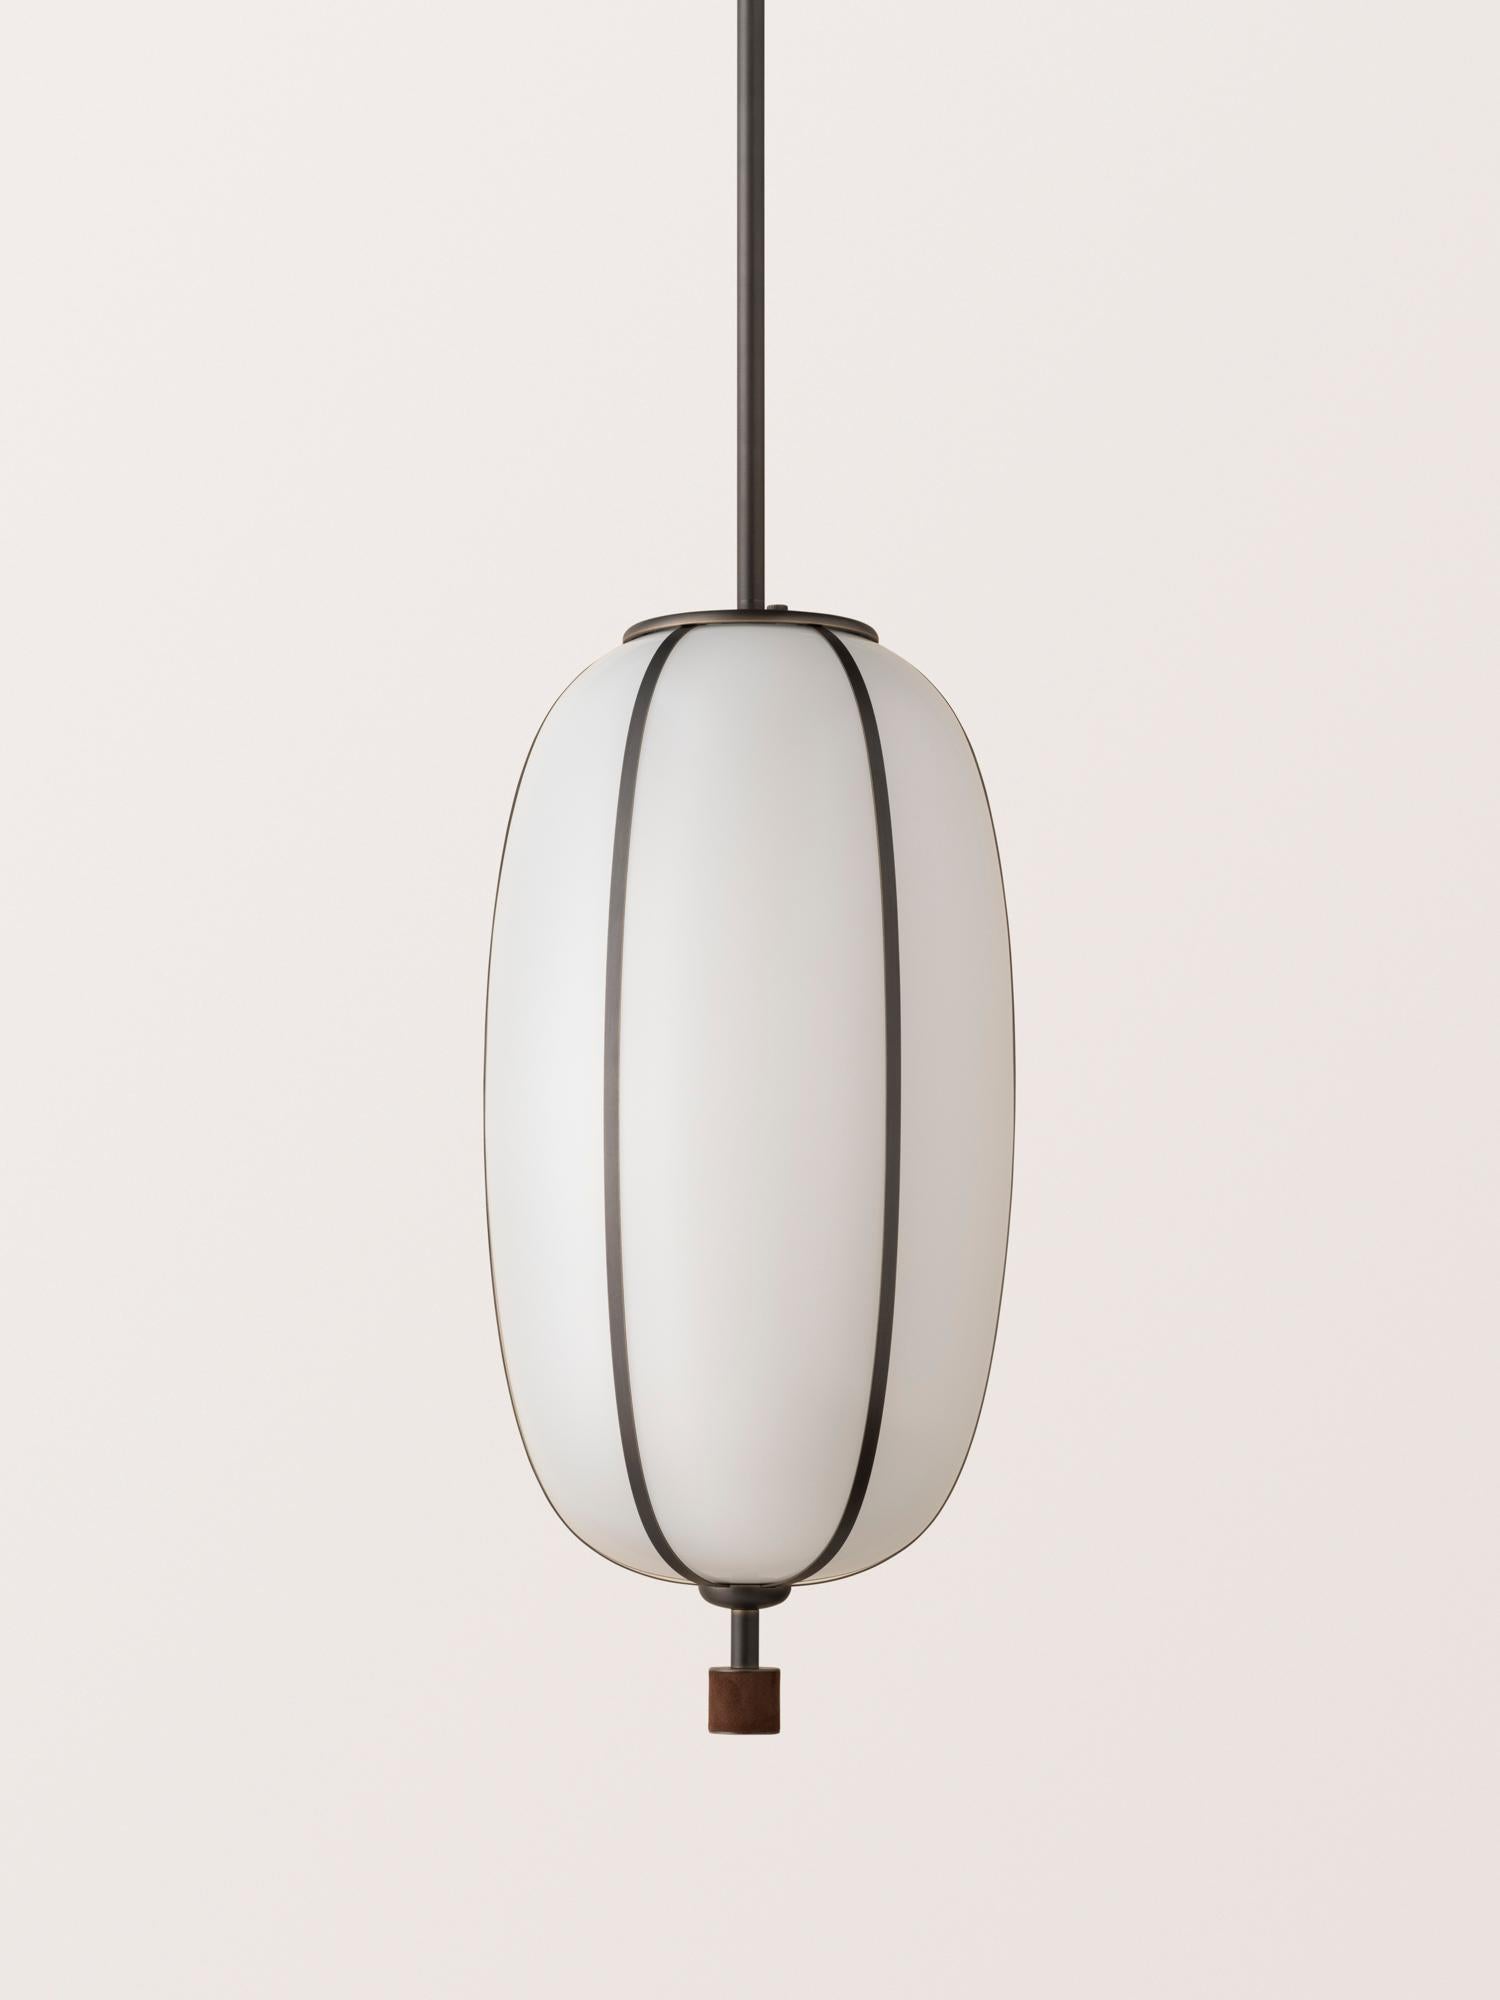 The Rib Pendant - Capsule is blown in Italy and delicately framed by thin brass ribs. A cylindrical brass finial, with optional hand-wrapped leather or suede, elongates the fixture and adds a finishing touch of refinement.

This listing is priced